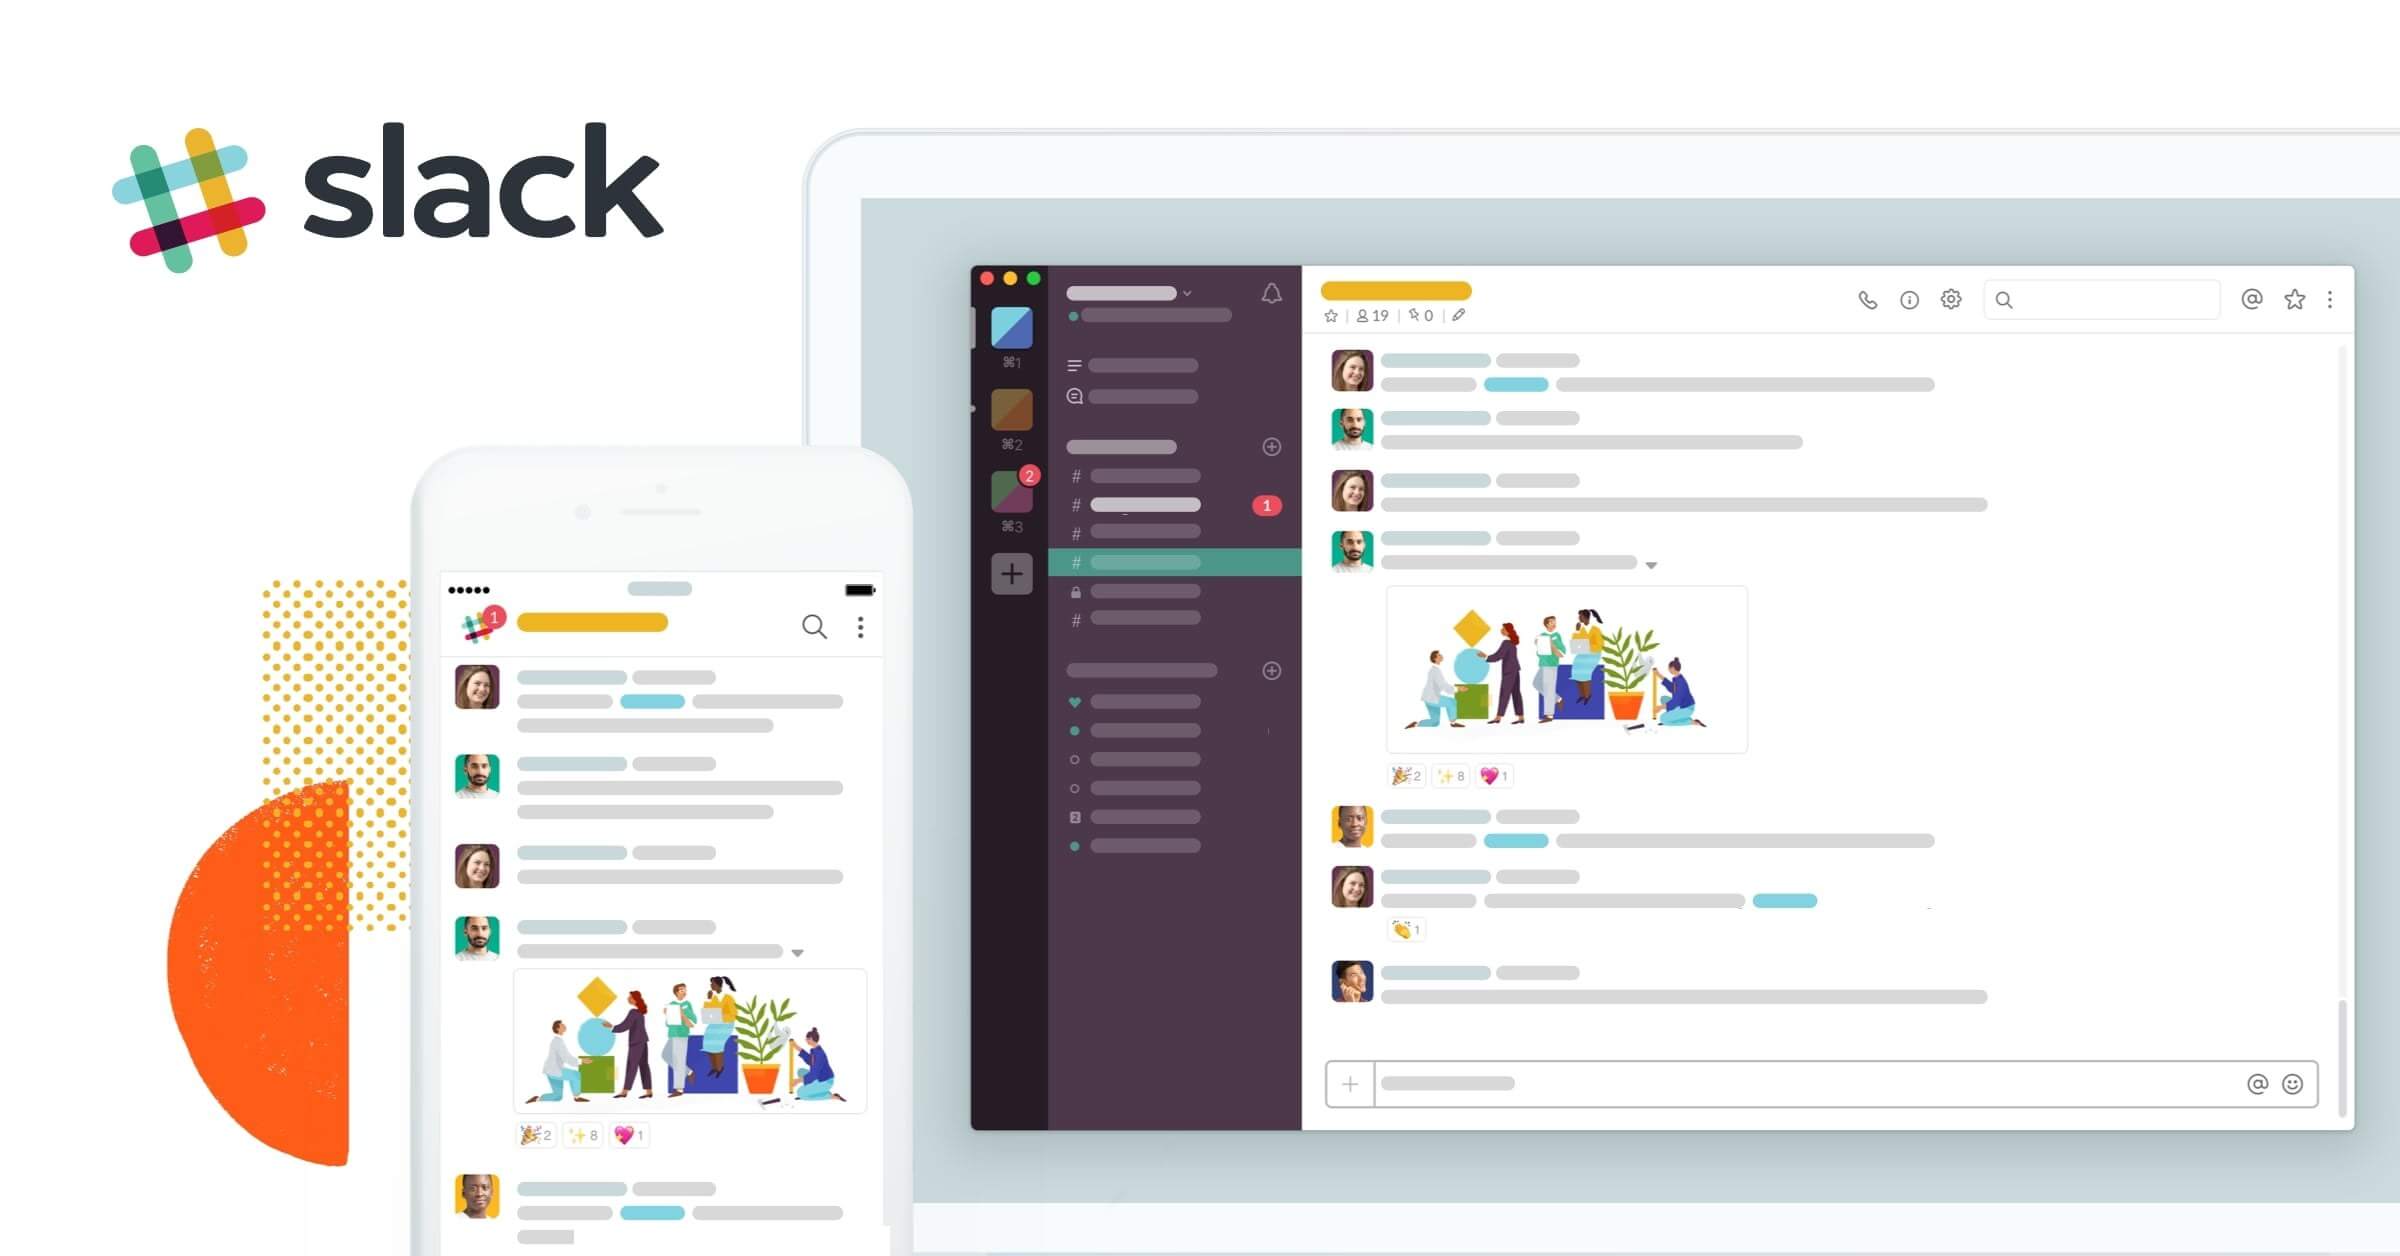 Slack is preparing for an IPO that may raise as much as $10 billion